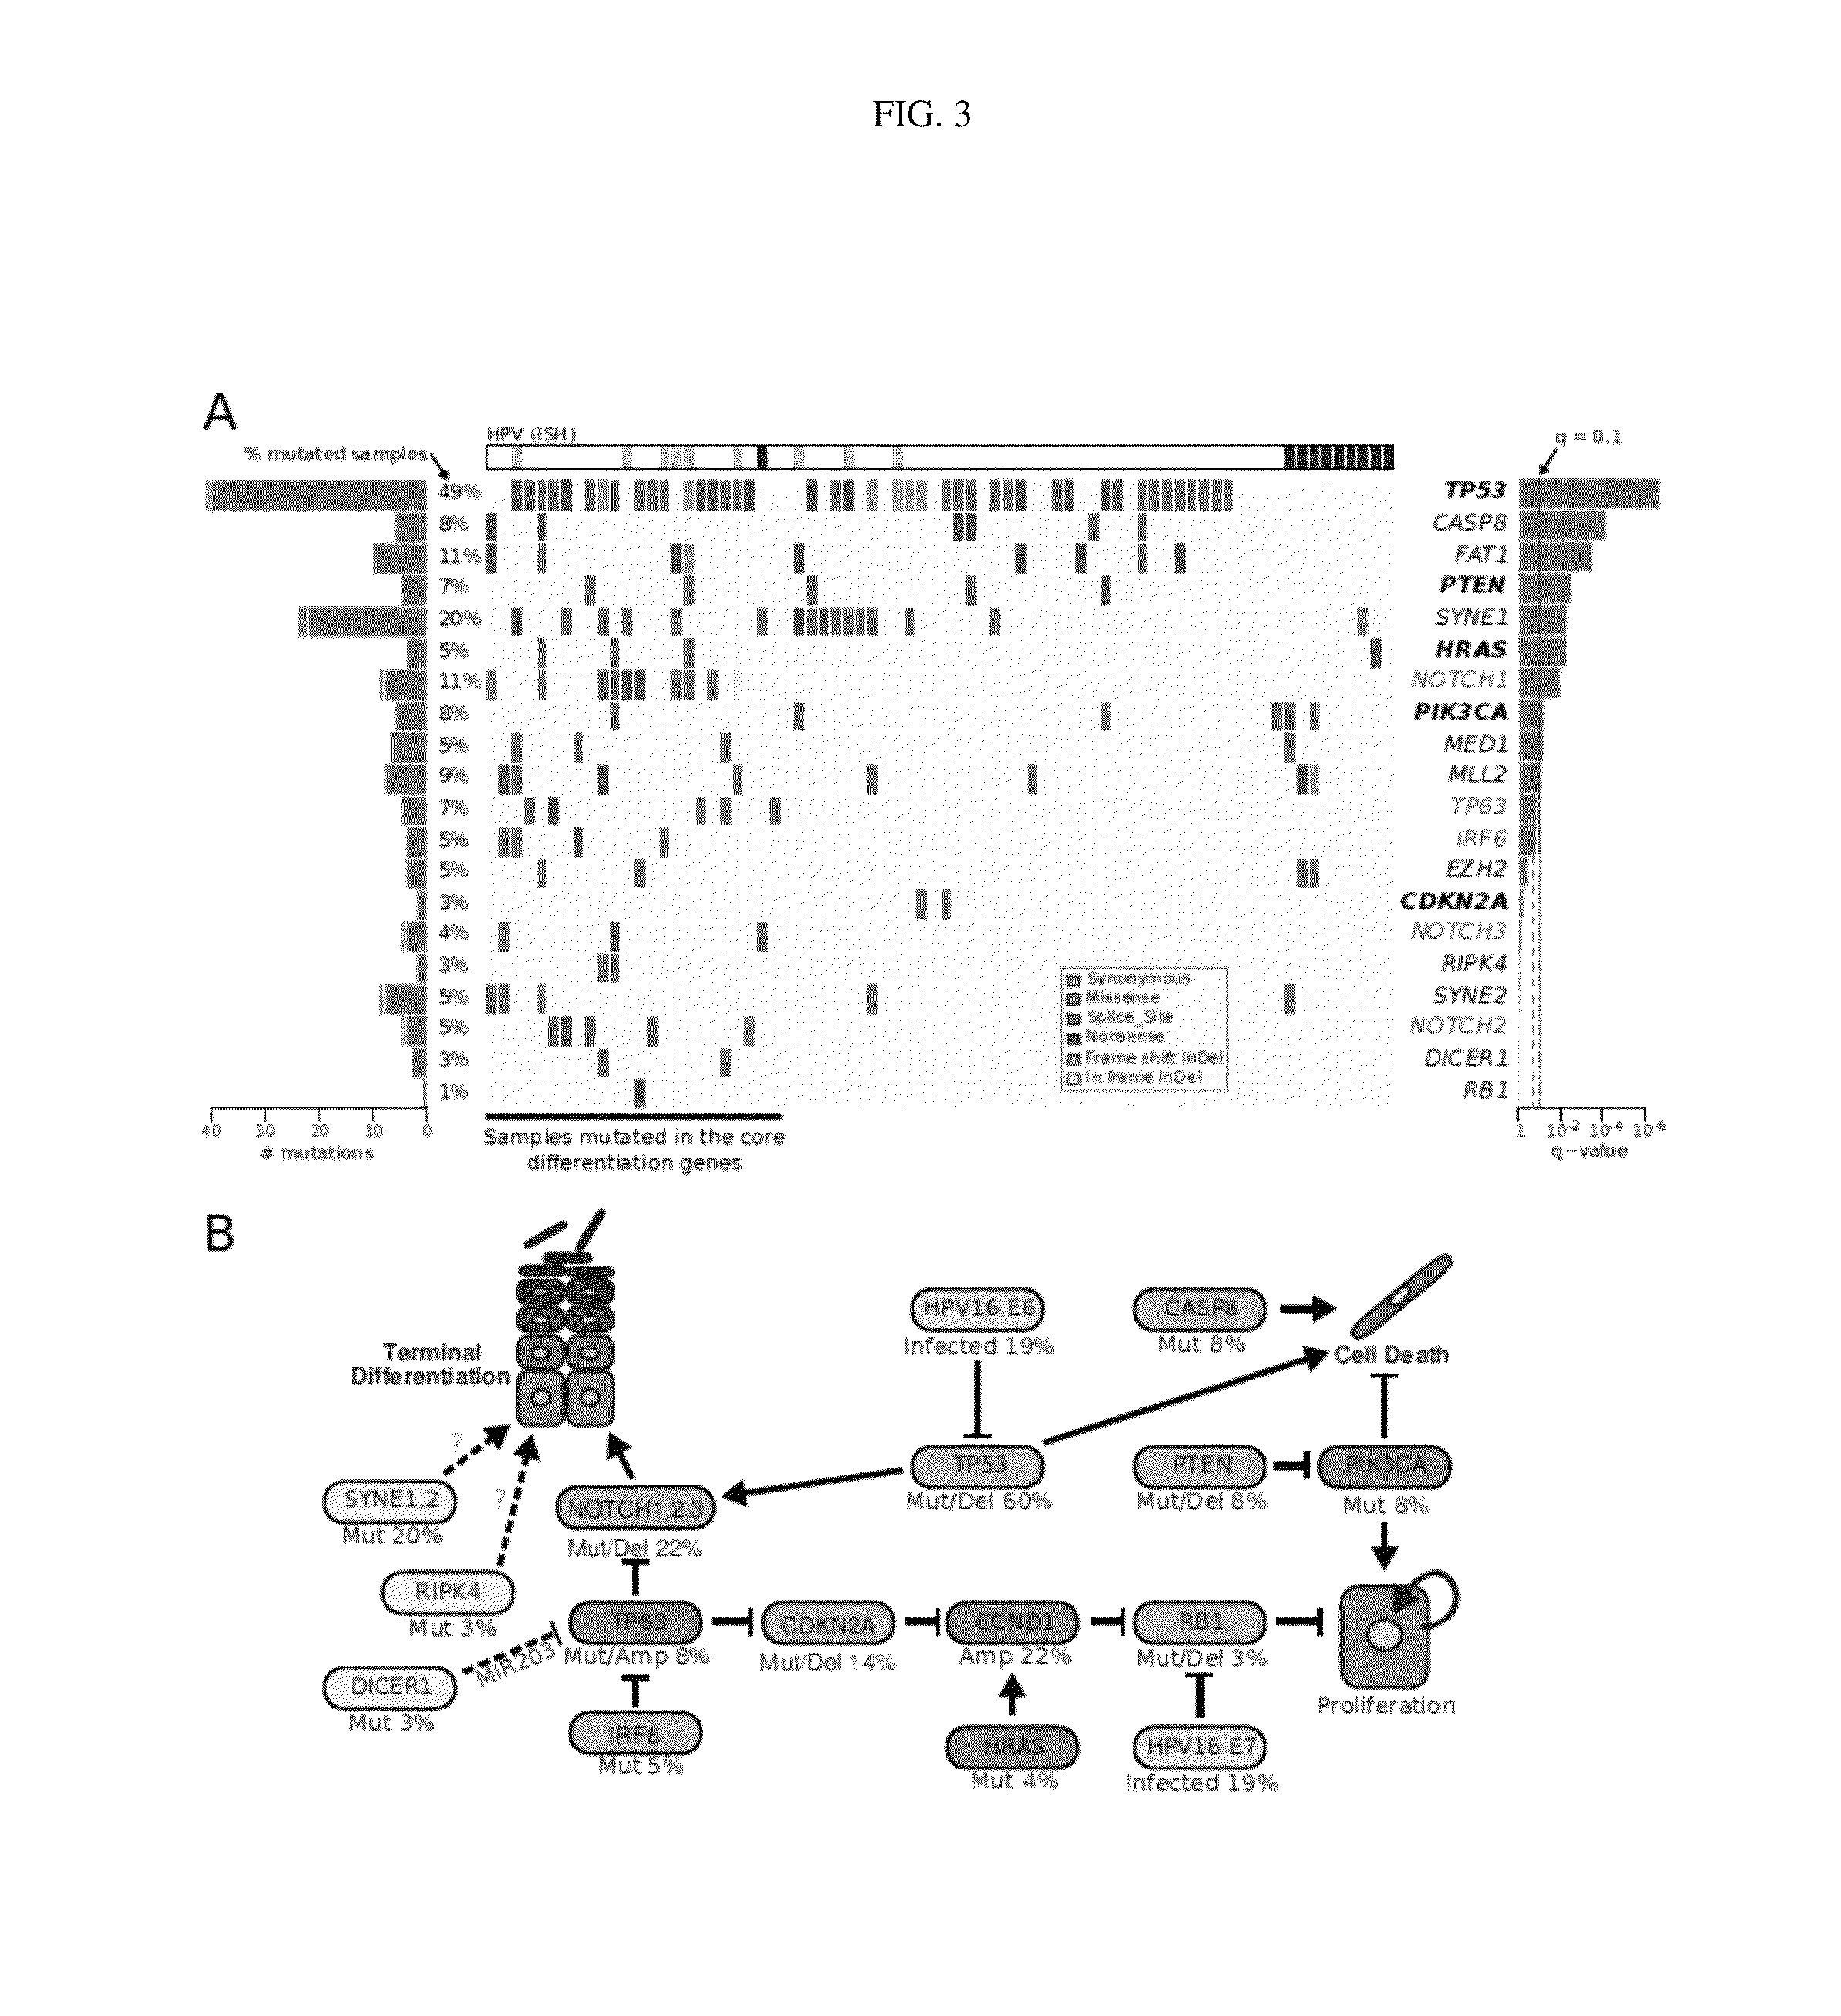 Compositions and methods of treating head and neck cancer